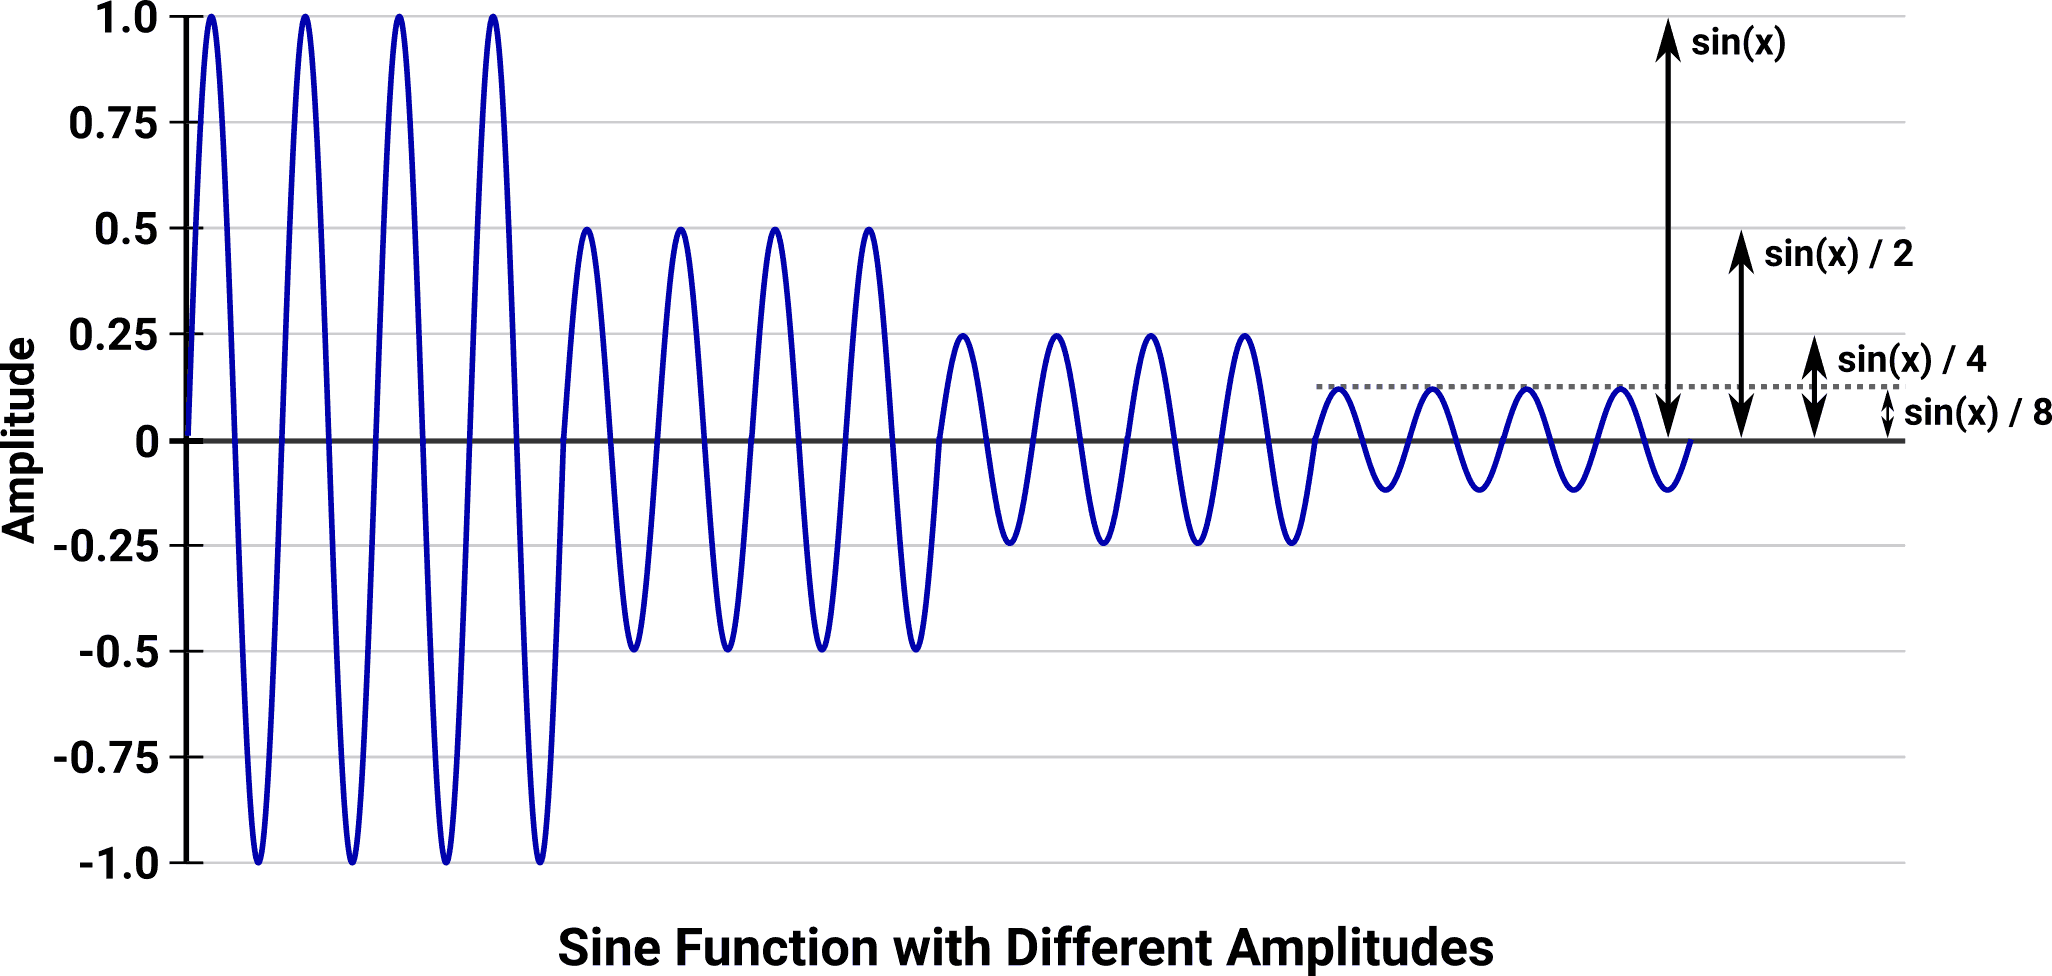 Examples of different amplitudes applied to the sine function.